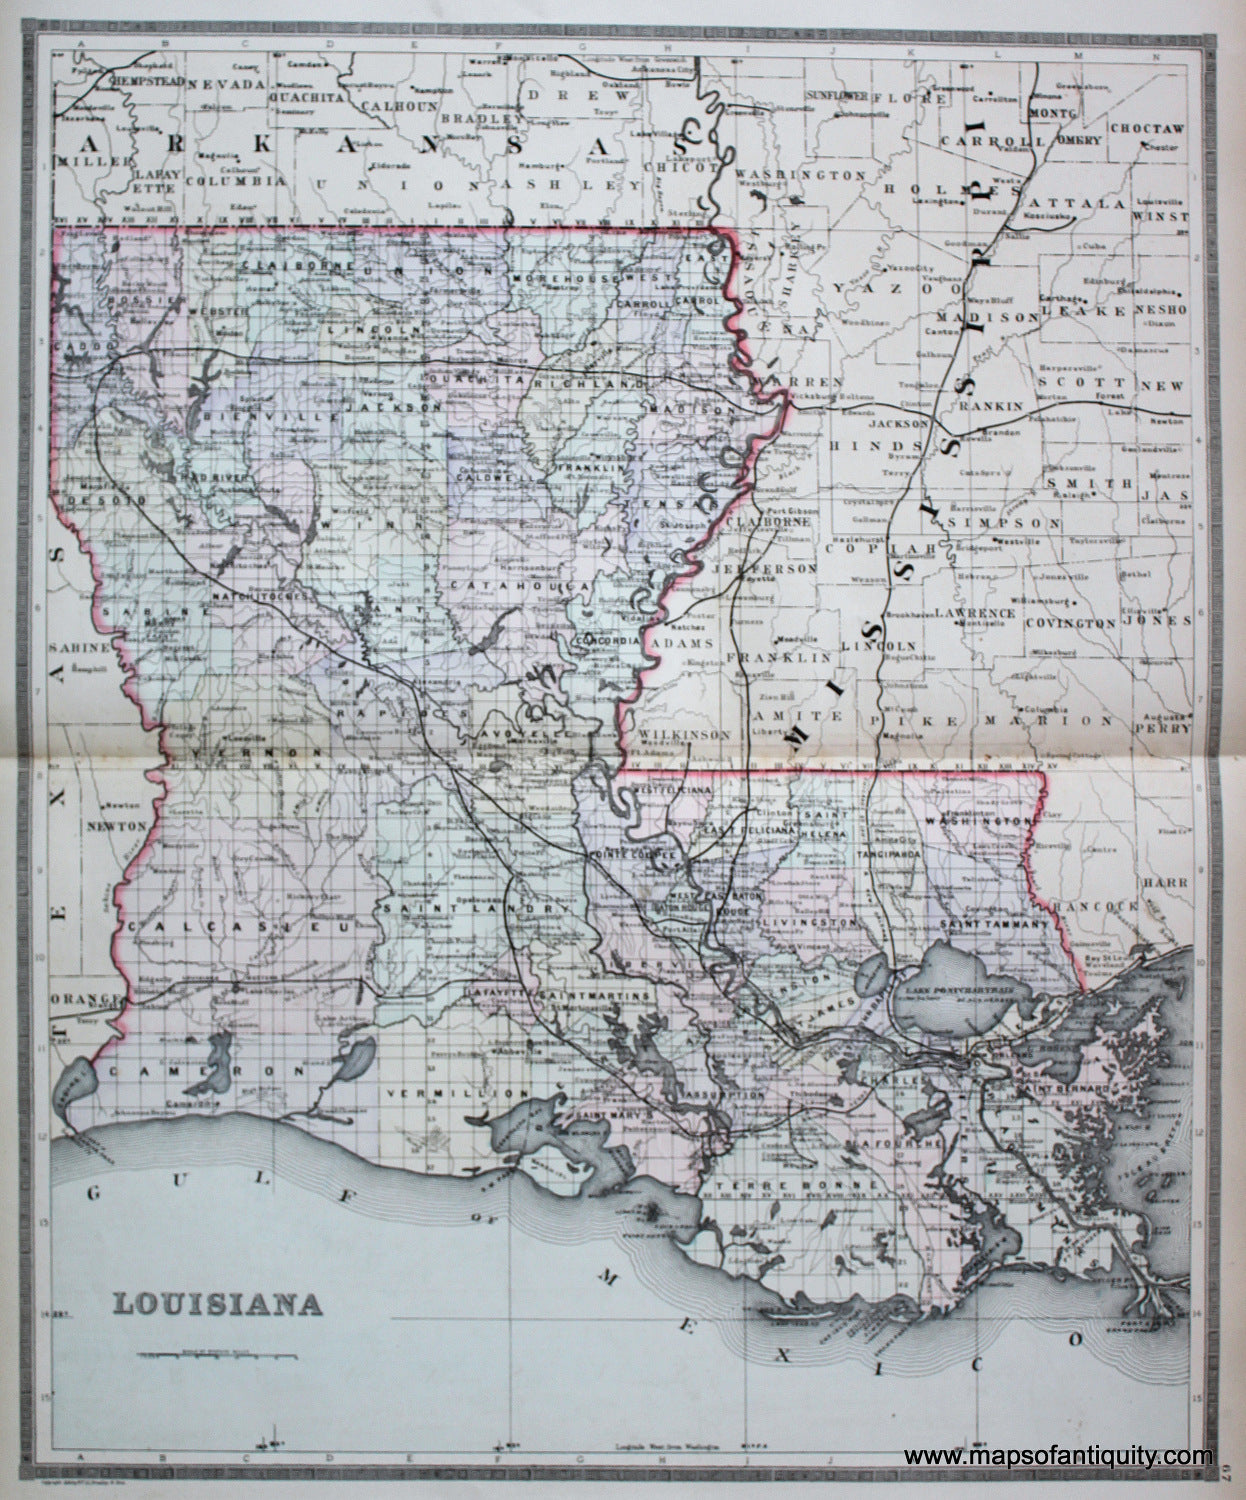 Antique-Hand-Colored-Map-Louisiana--United-States-South-1887-Bradley-Maps-Of-Antiquity